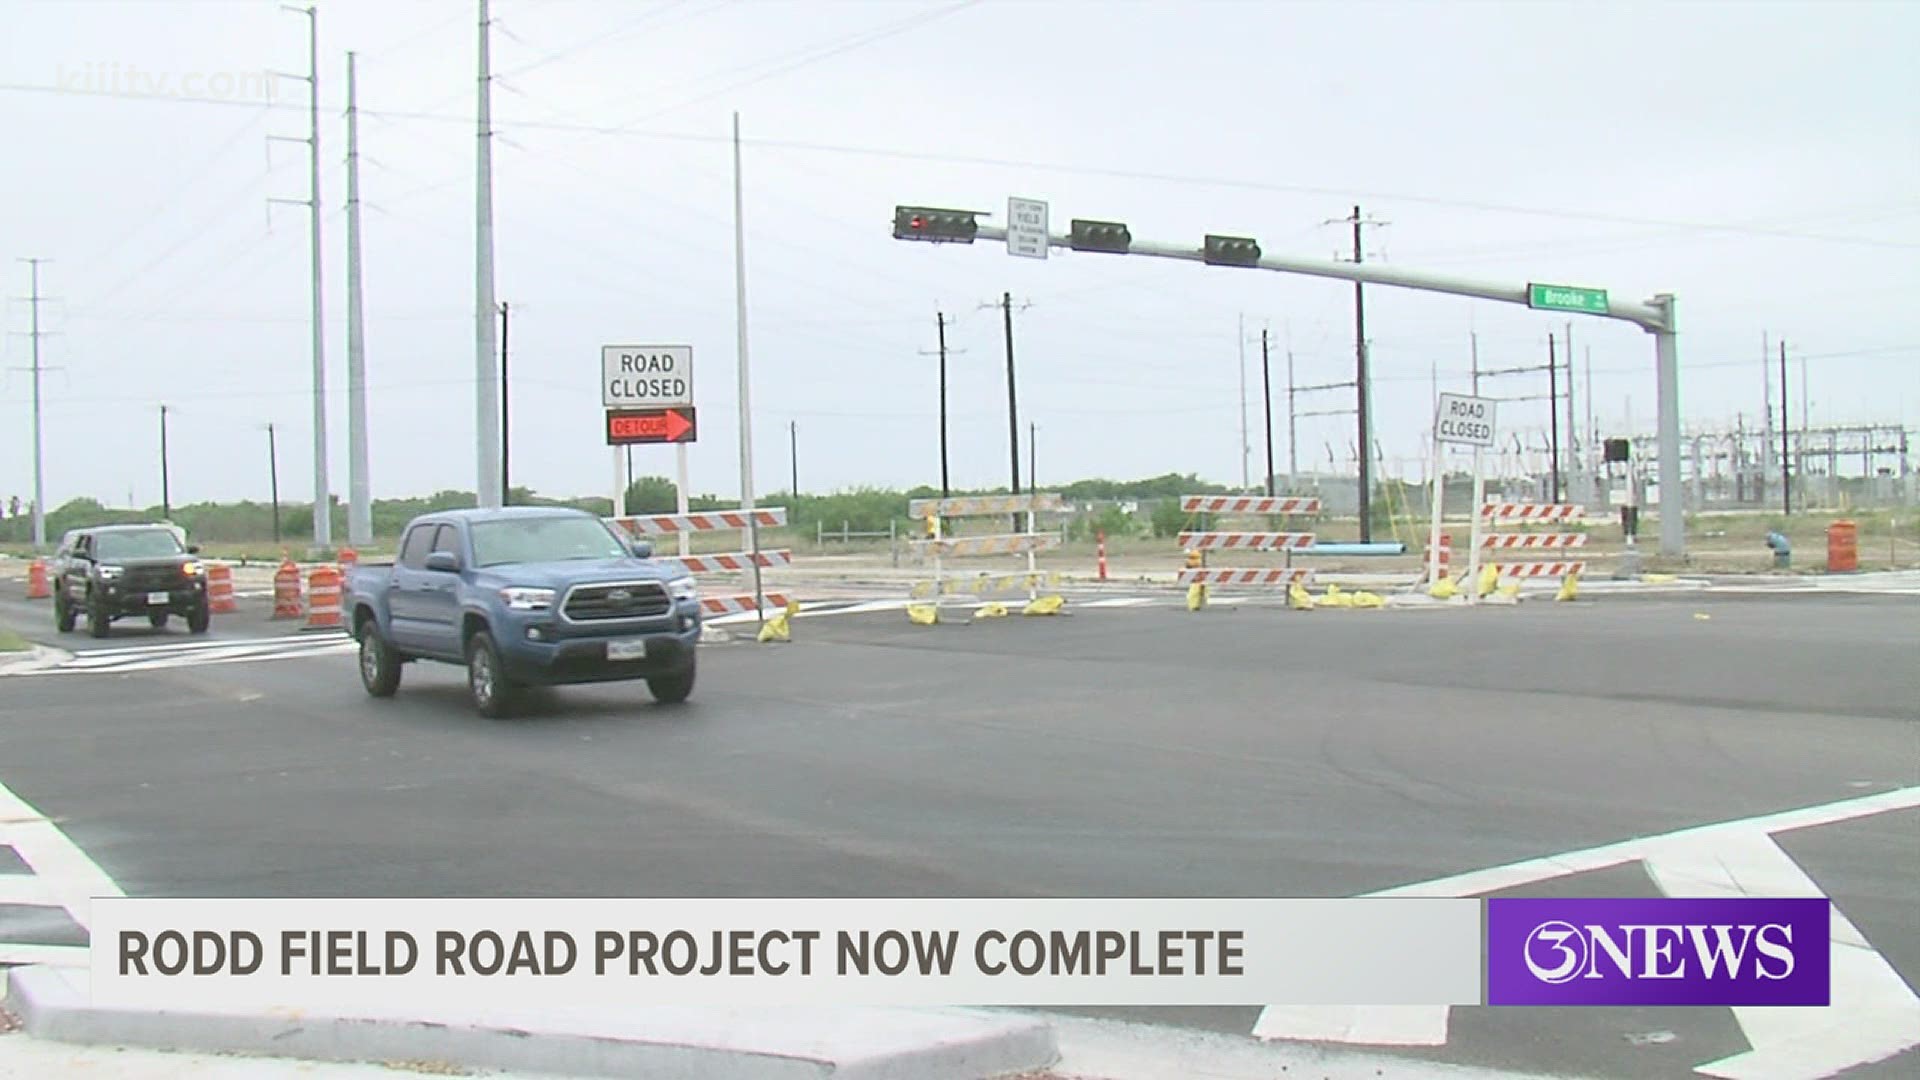 The project, which began in November 2018, expanded Rodd Field Road from two to four lanes with a 30-foot center median.